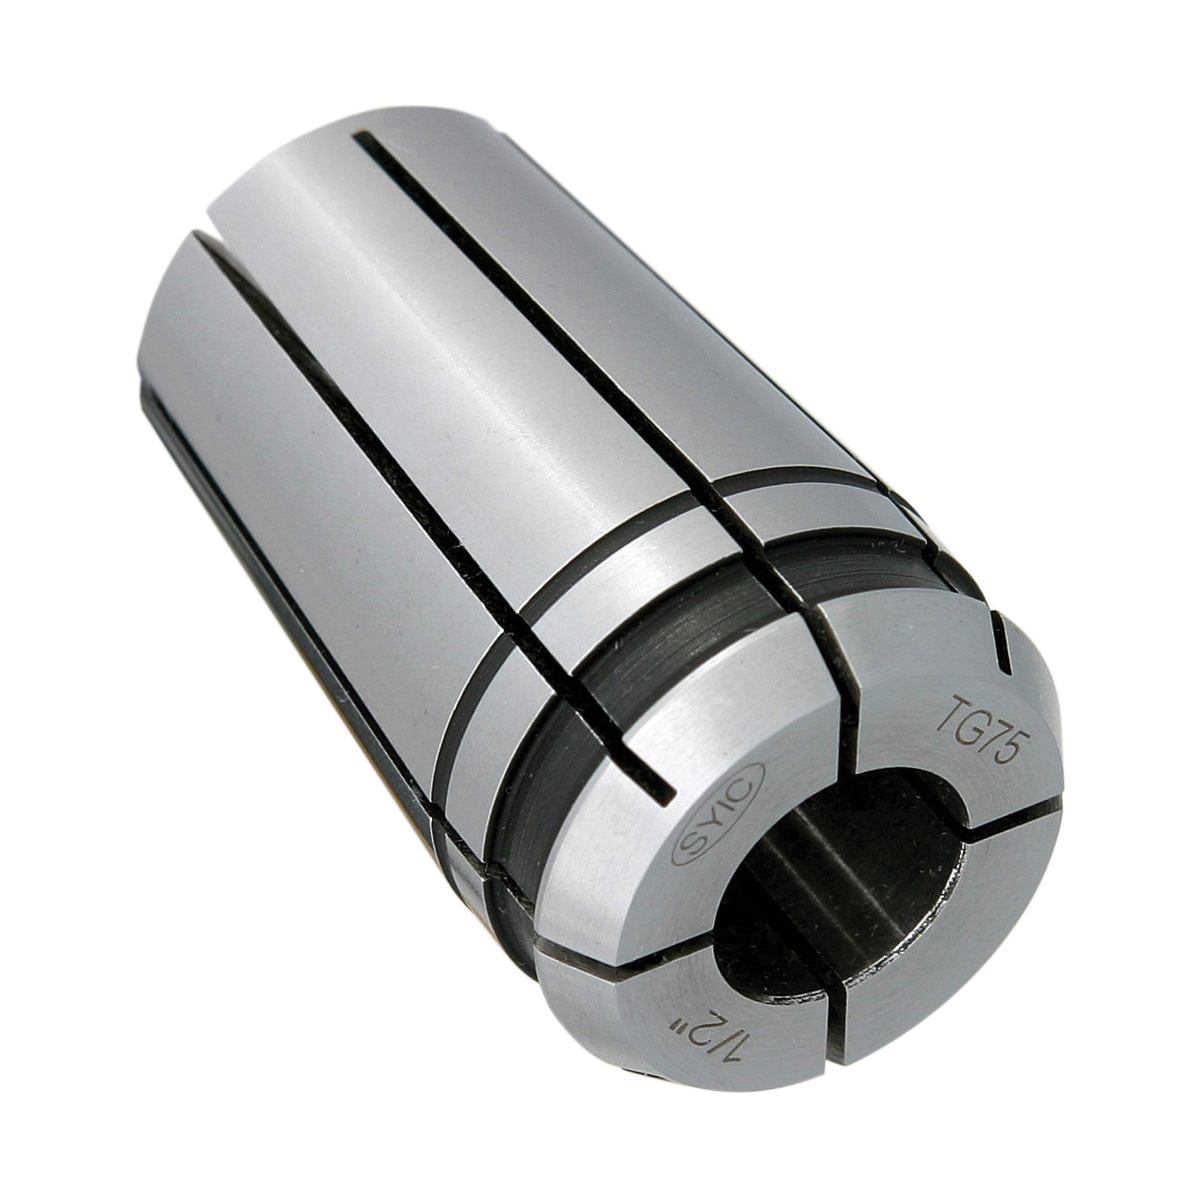 TG75 21/32 COLLET